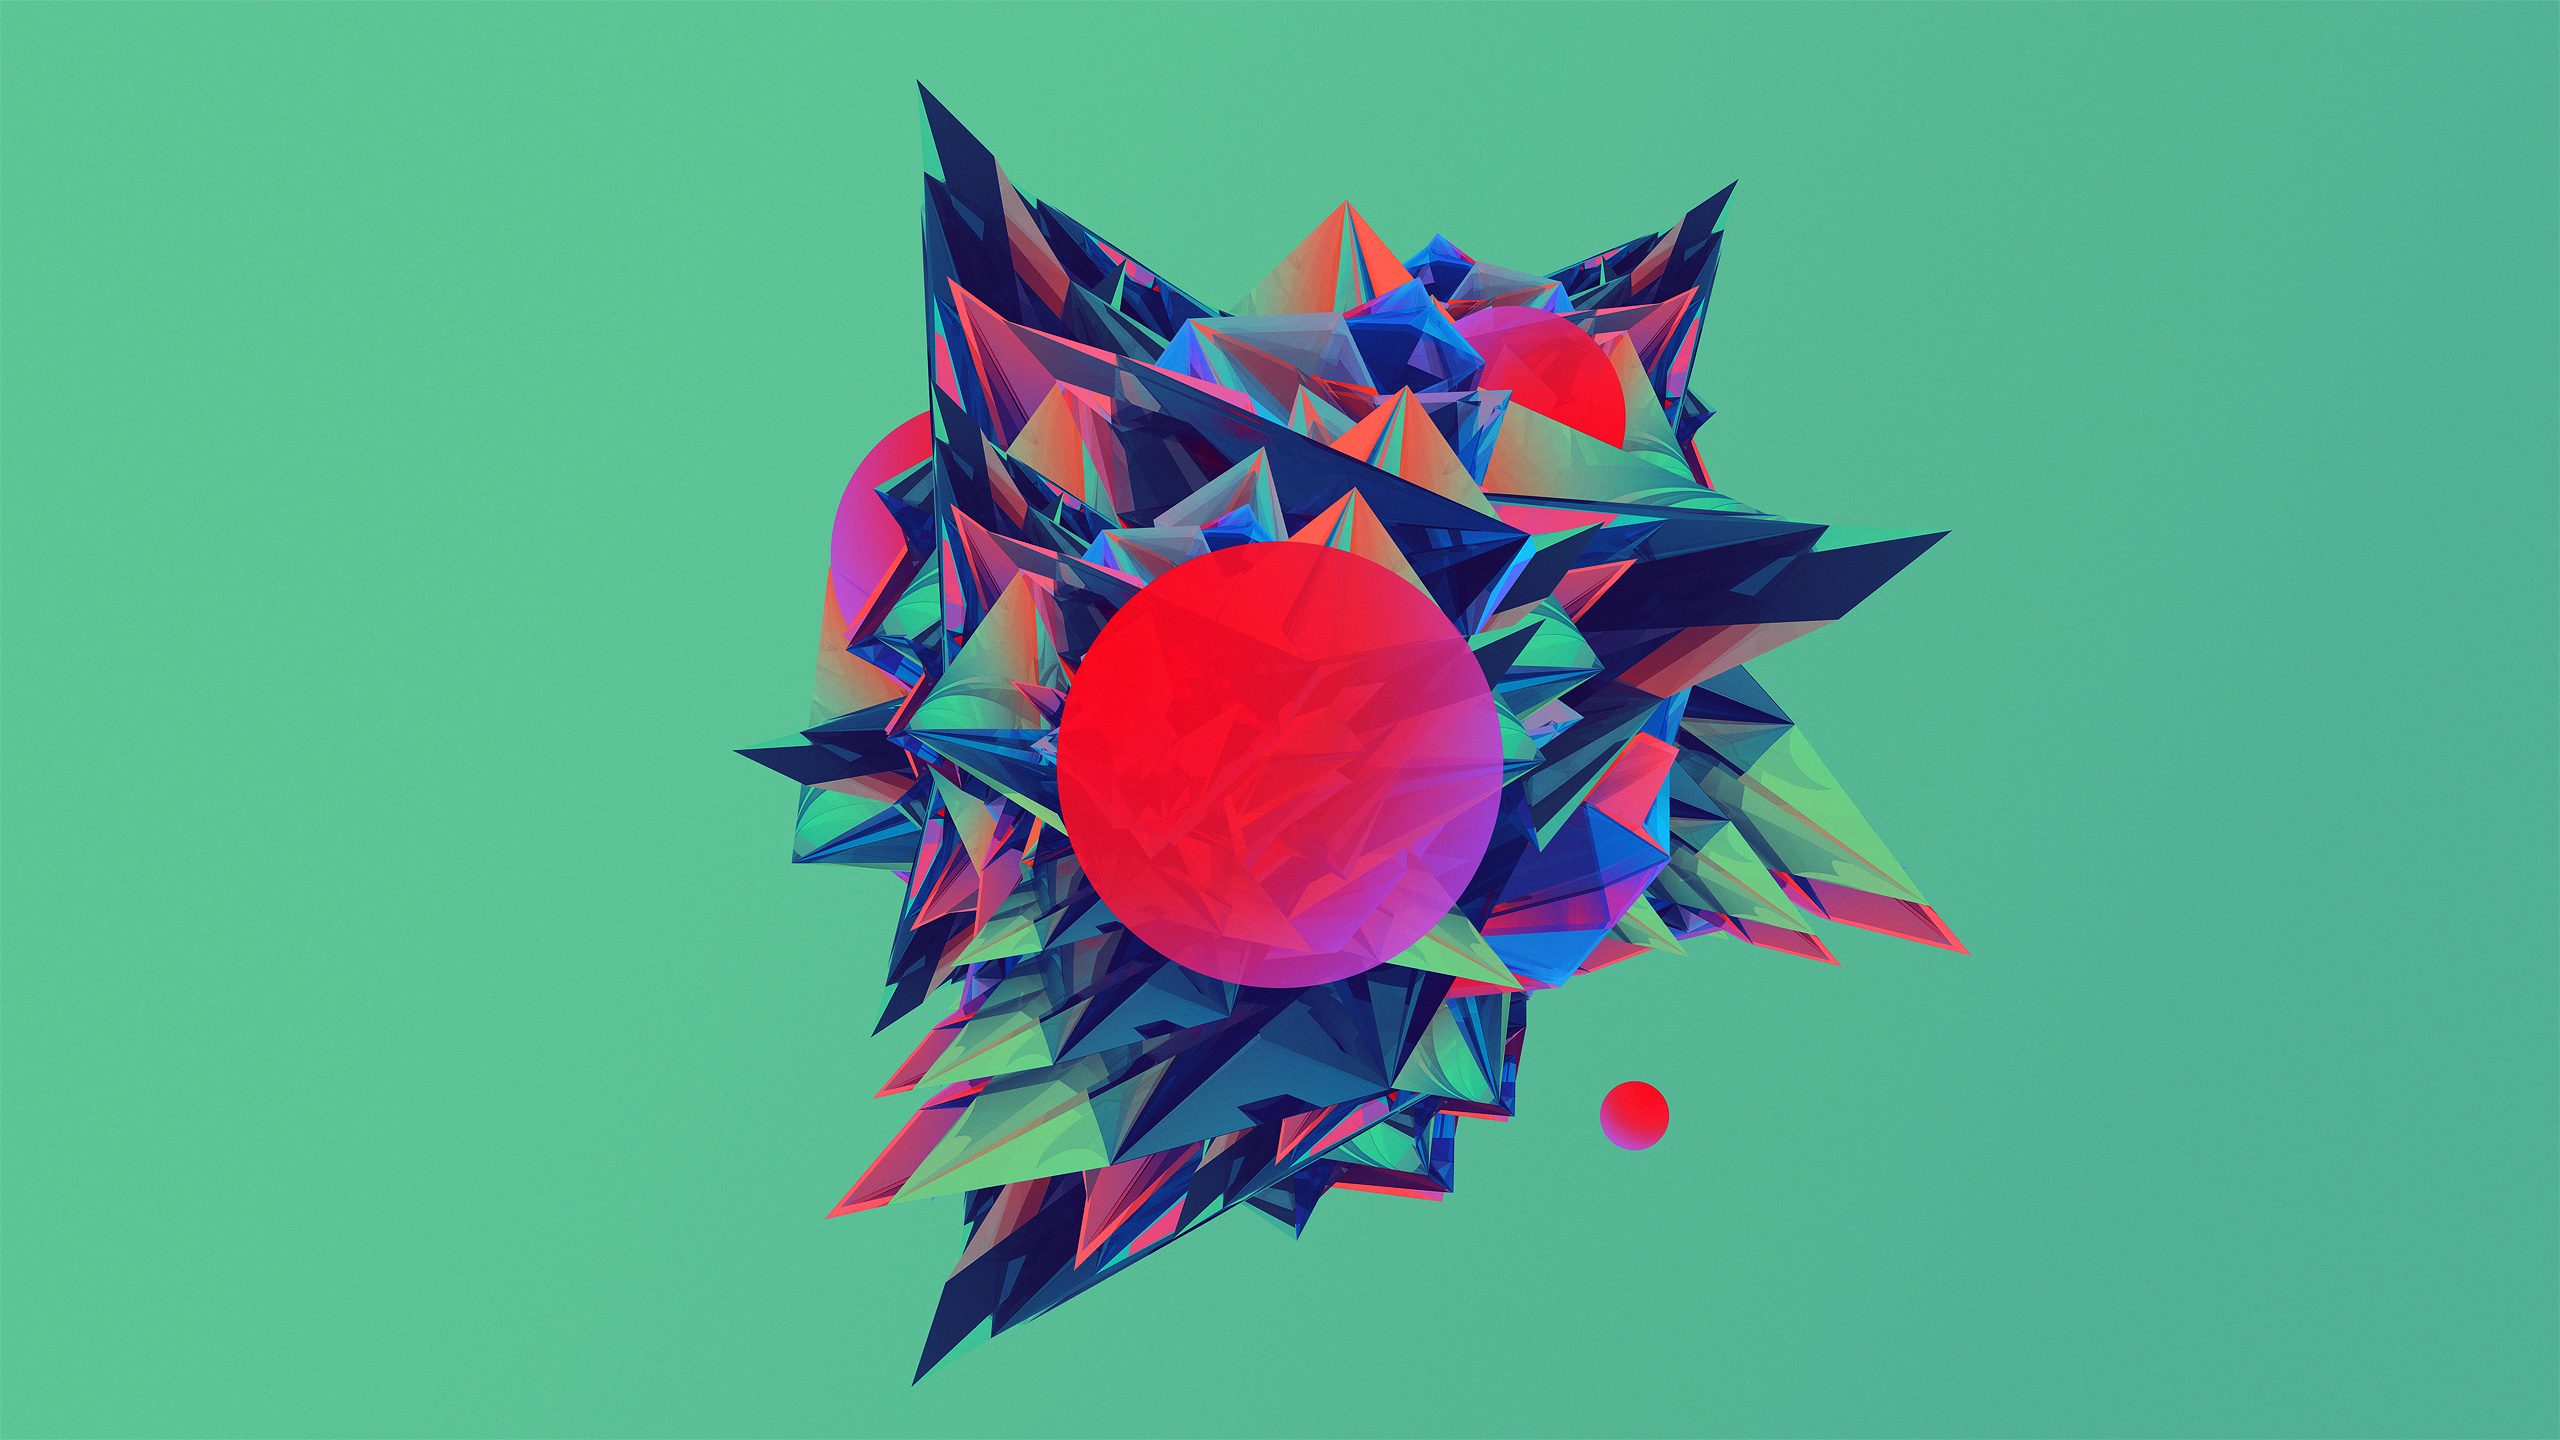 General 2560x1440 minimalism abstract Justin Maller facets shapes digital art simple background circle 3D Abstract CGI